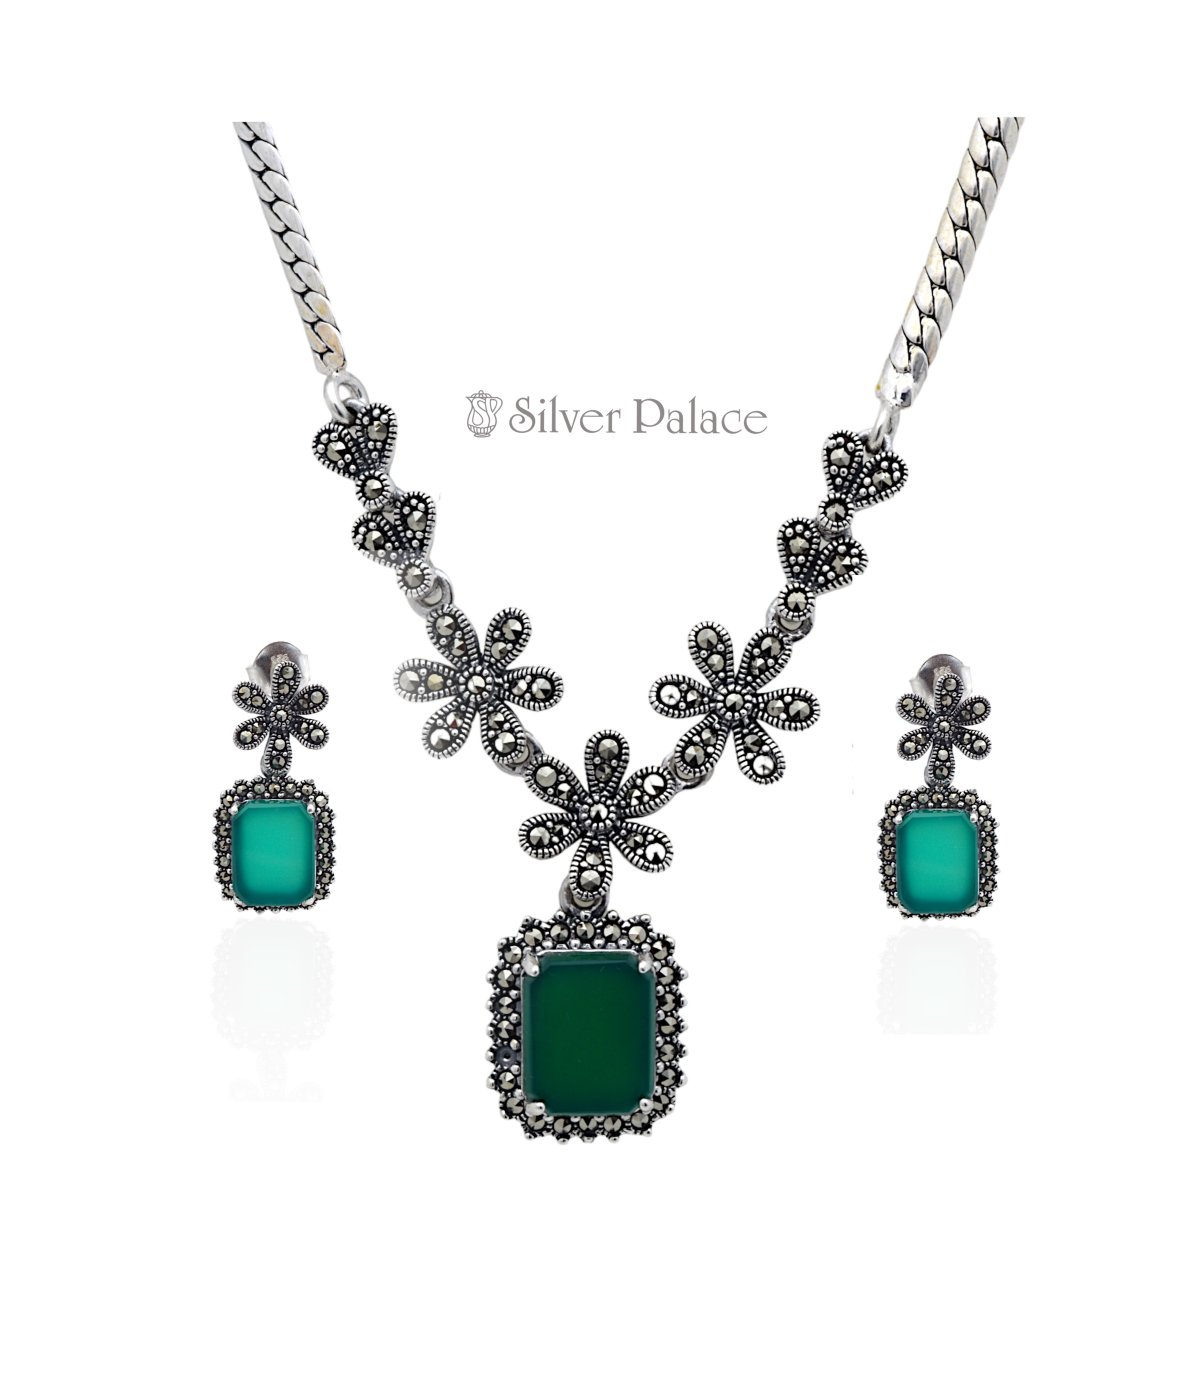 925 STERLING SILVER Fashion Women's Necklace set With Earrings